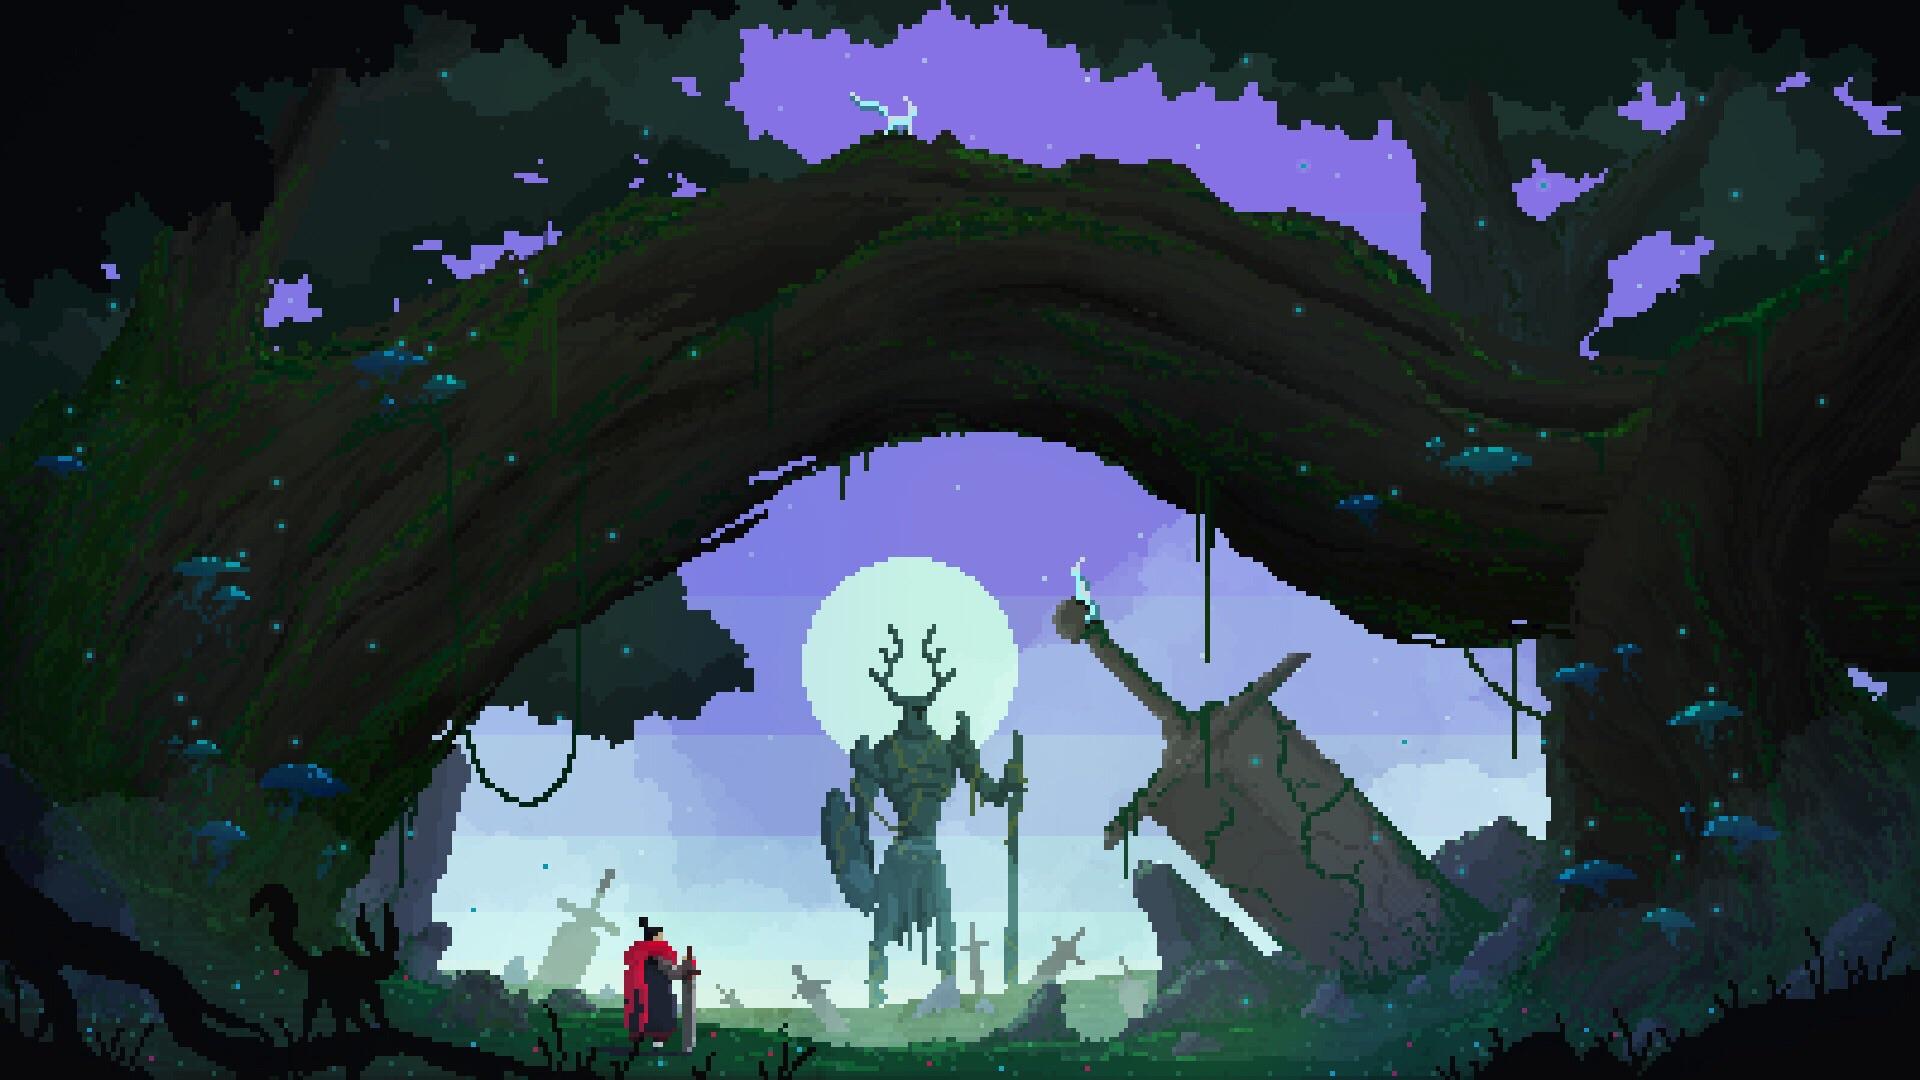 The forest of hollow trees - Pixel art